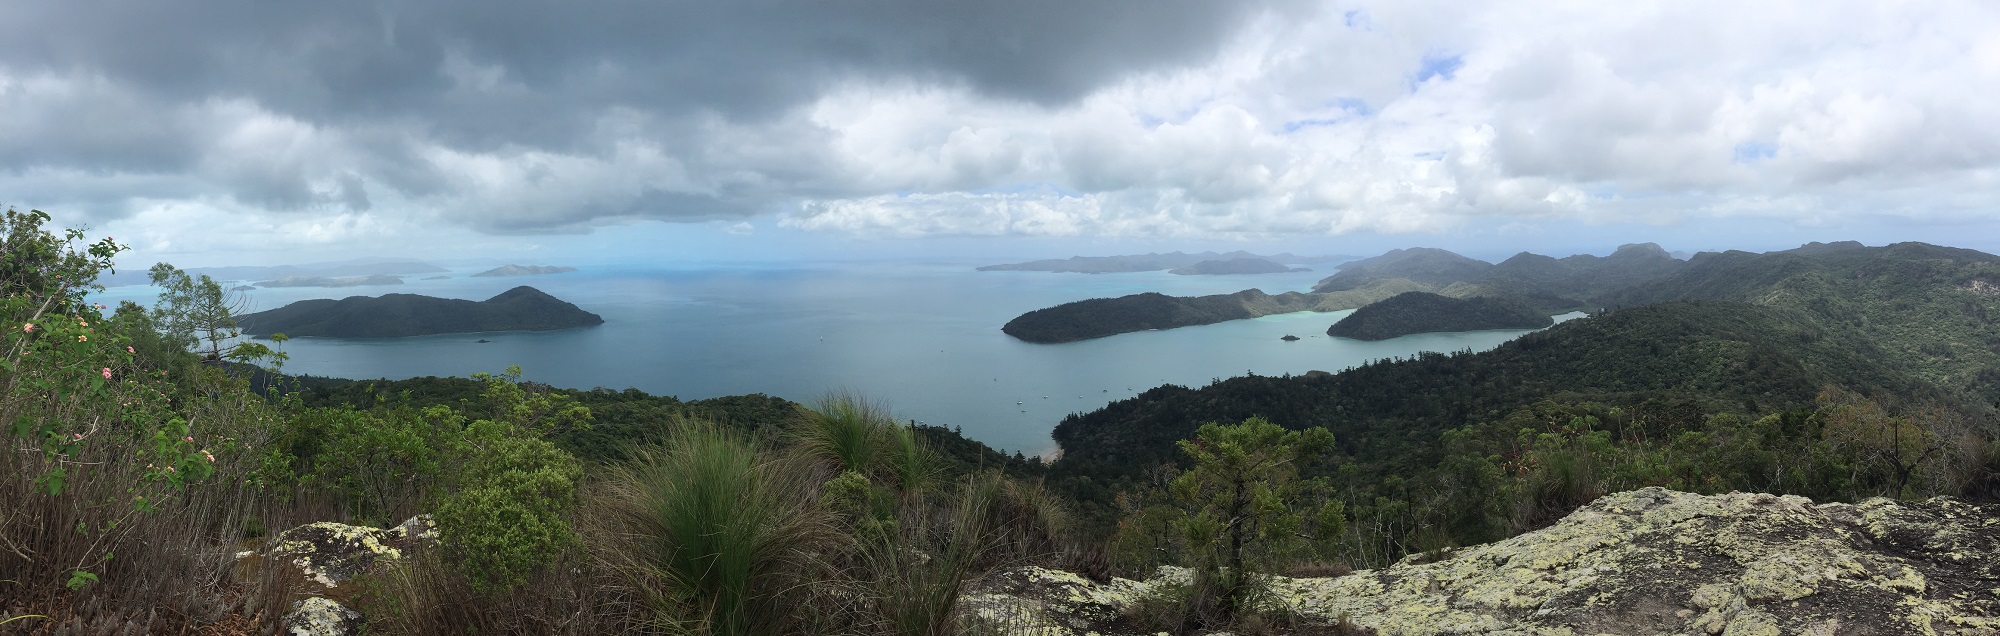 The view north from Whitsunday Peak. Cid Island on the left, Cid Harbour the protected area between the island and the headland jutting out from the right.